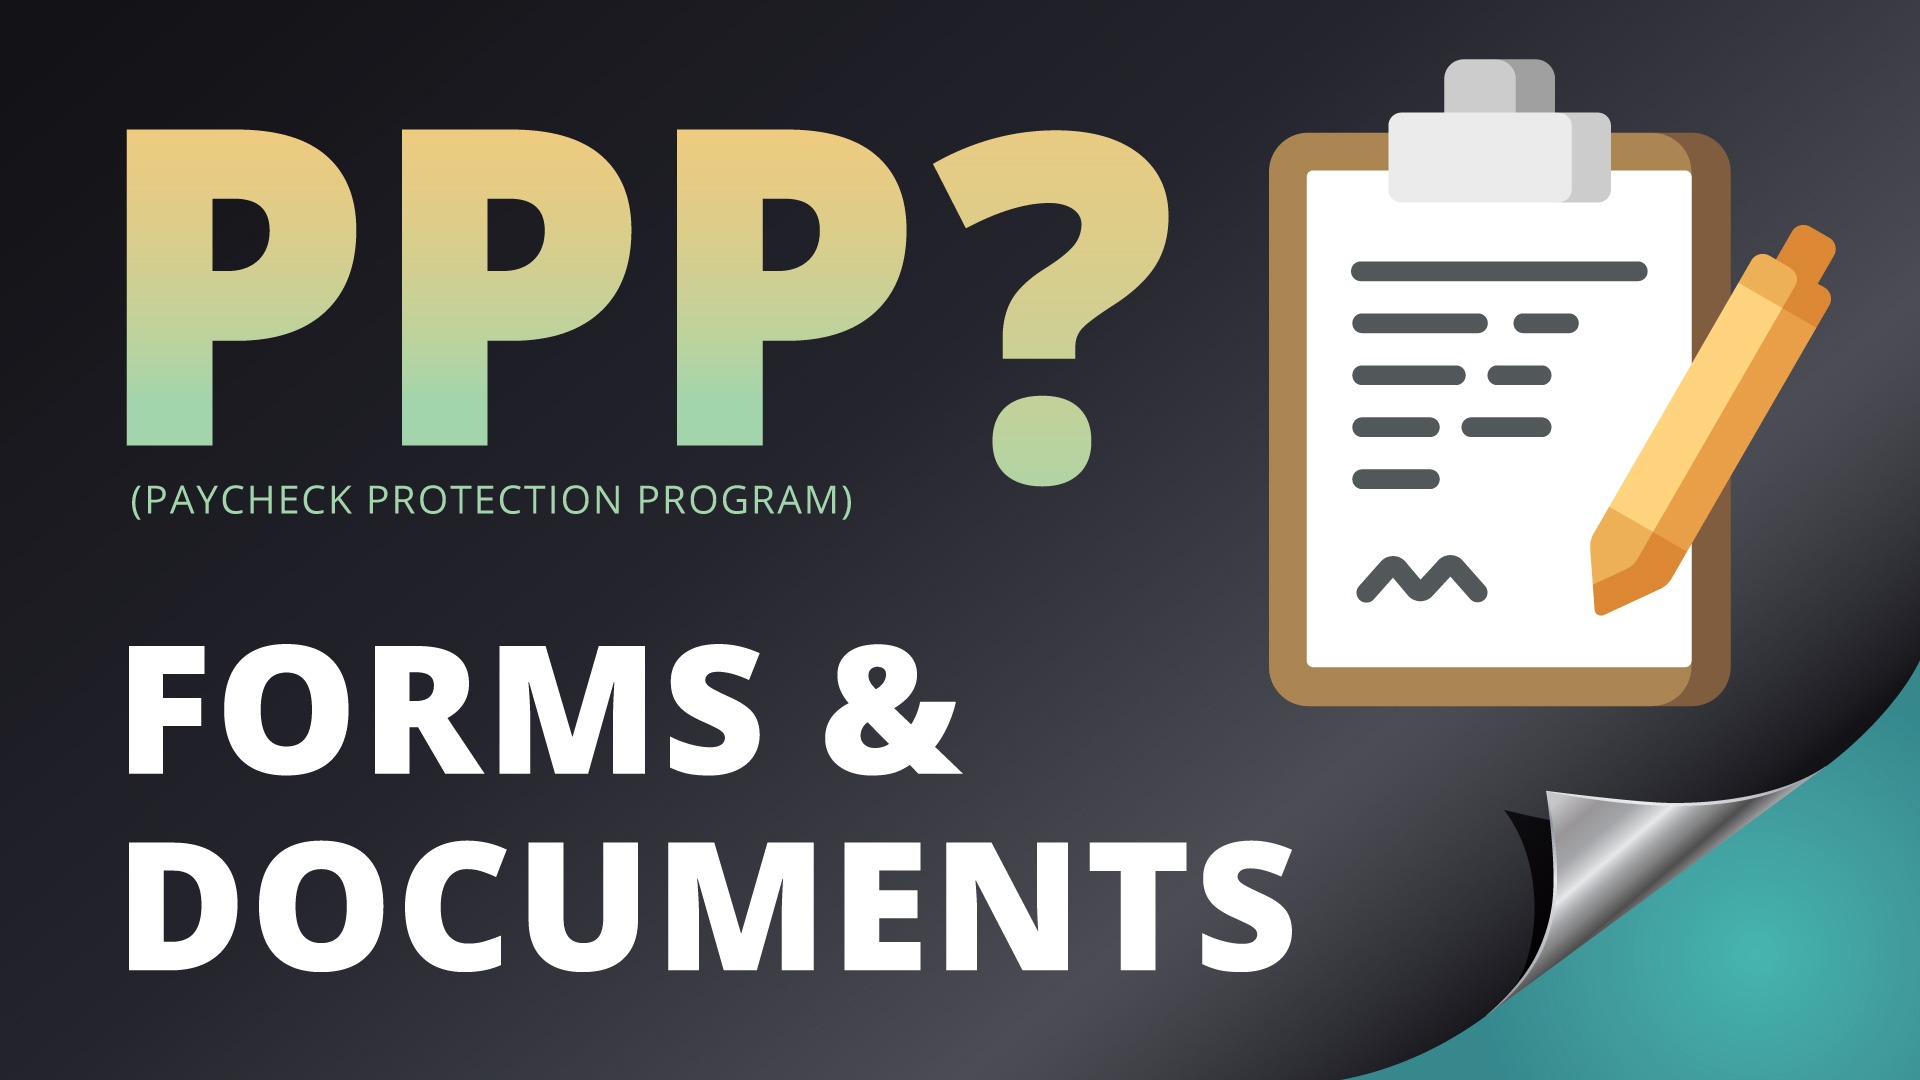 What You Need to Apply for PPP, Forms & Documents